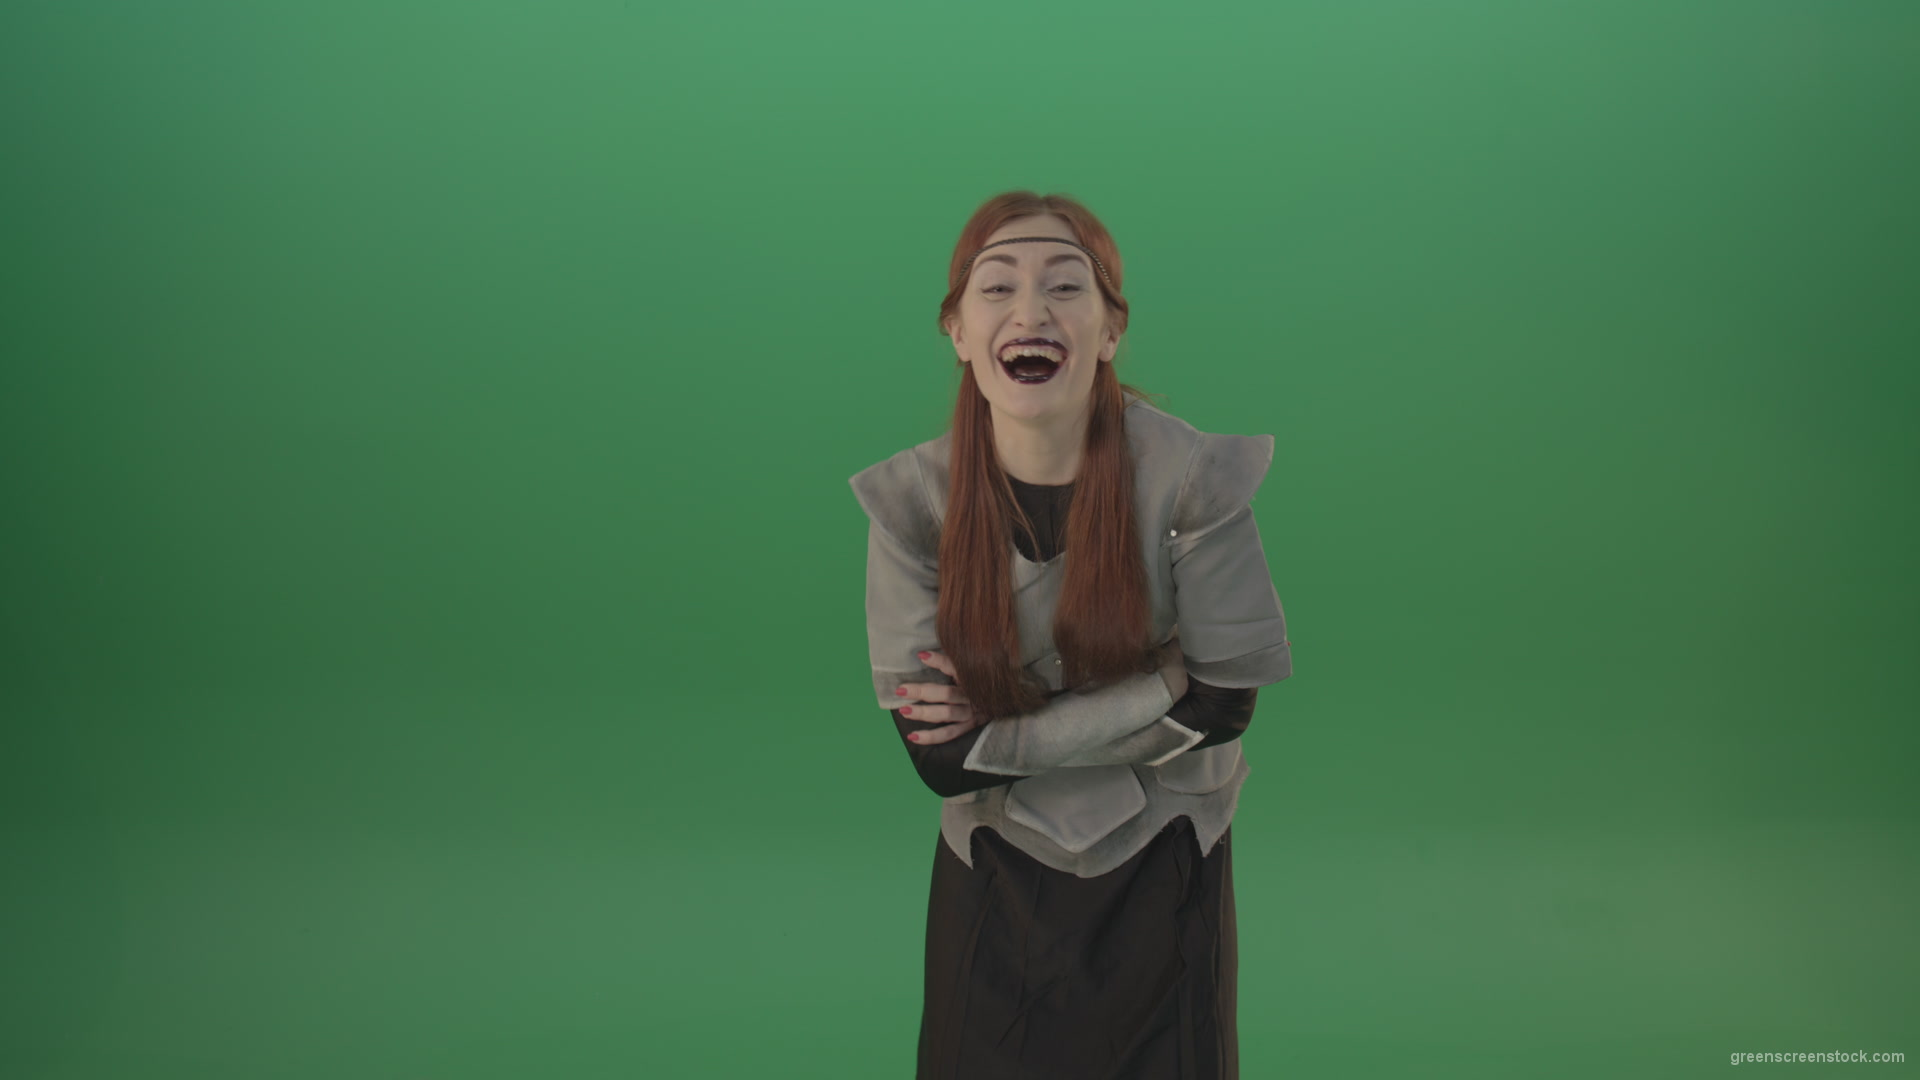 Girl-in-a-medieval-wig-costume-laughs-on-a-green-background-1_005 Green Screen Stock